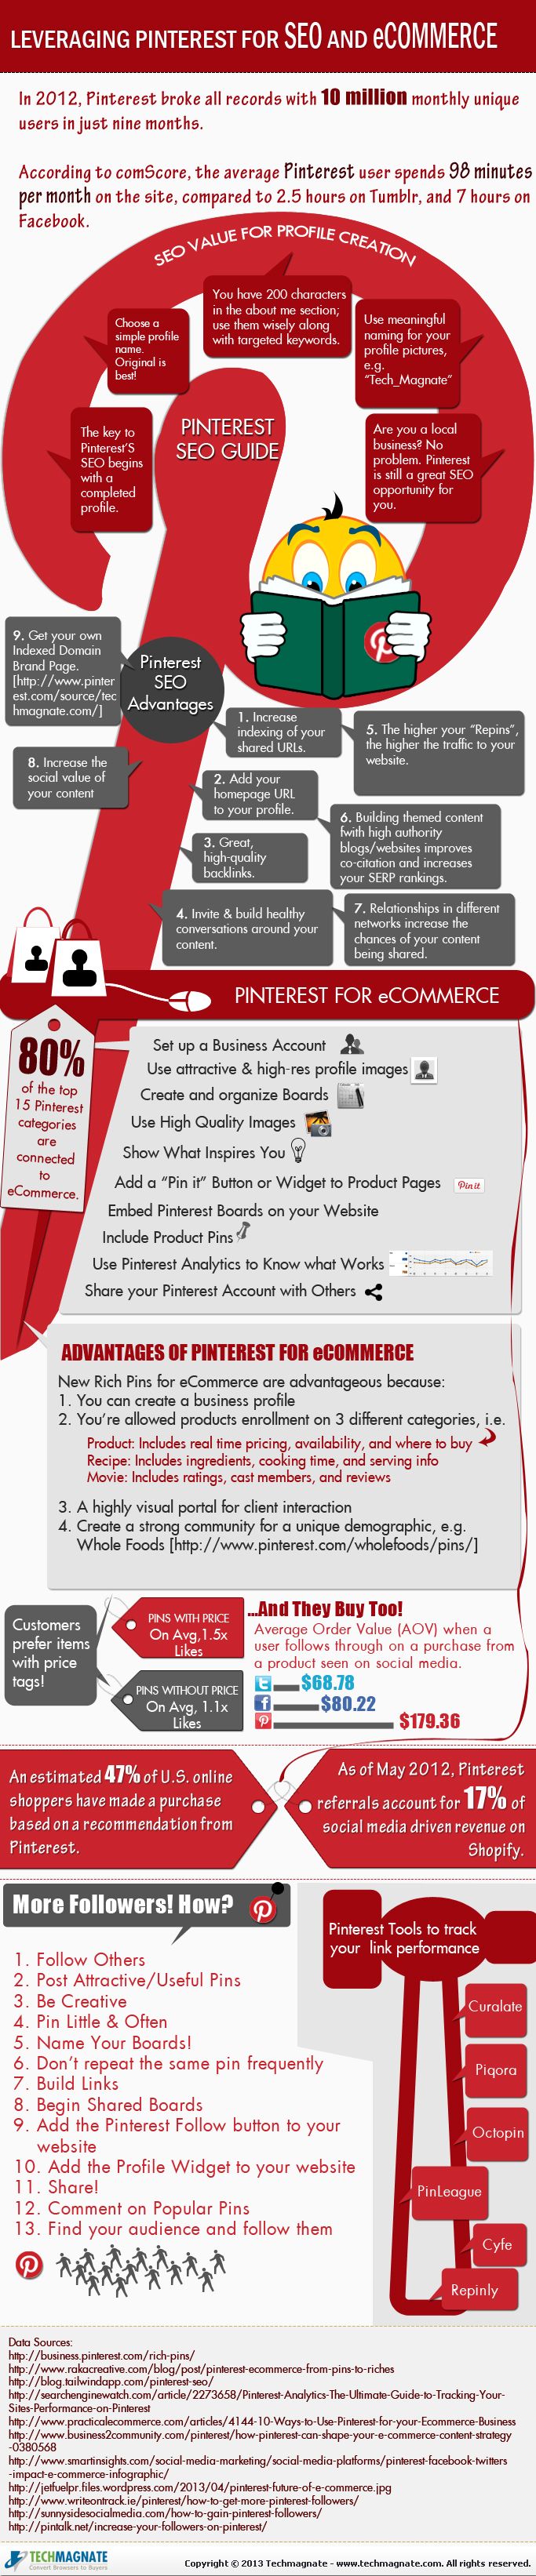 How To Leverage Pinterest For SEO [Infographic]